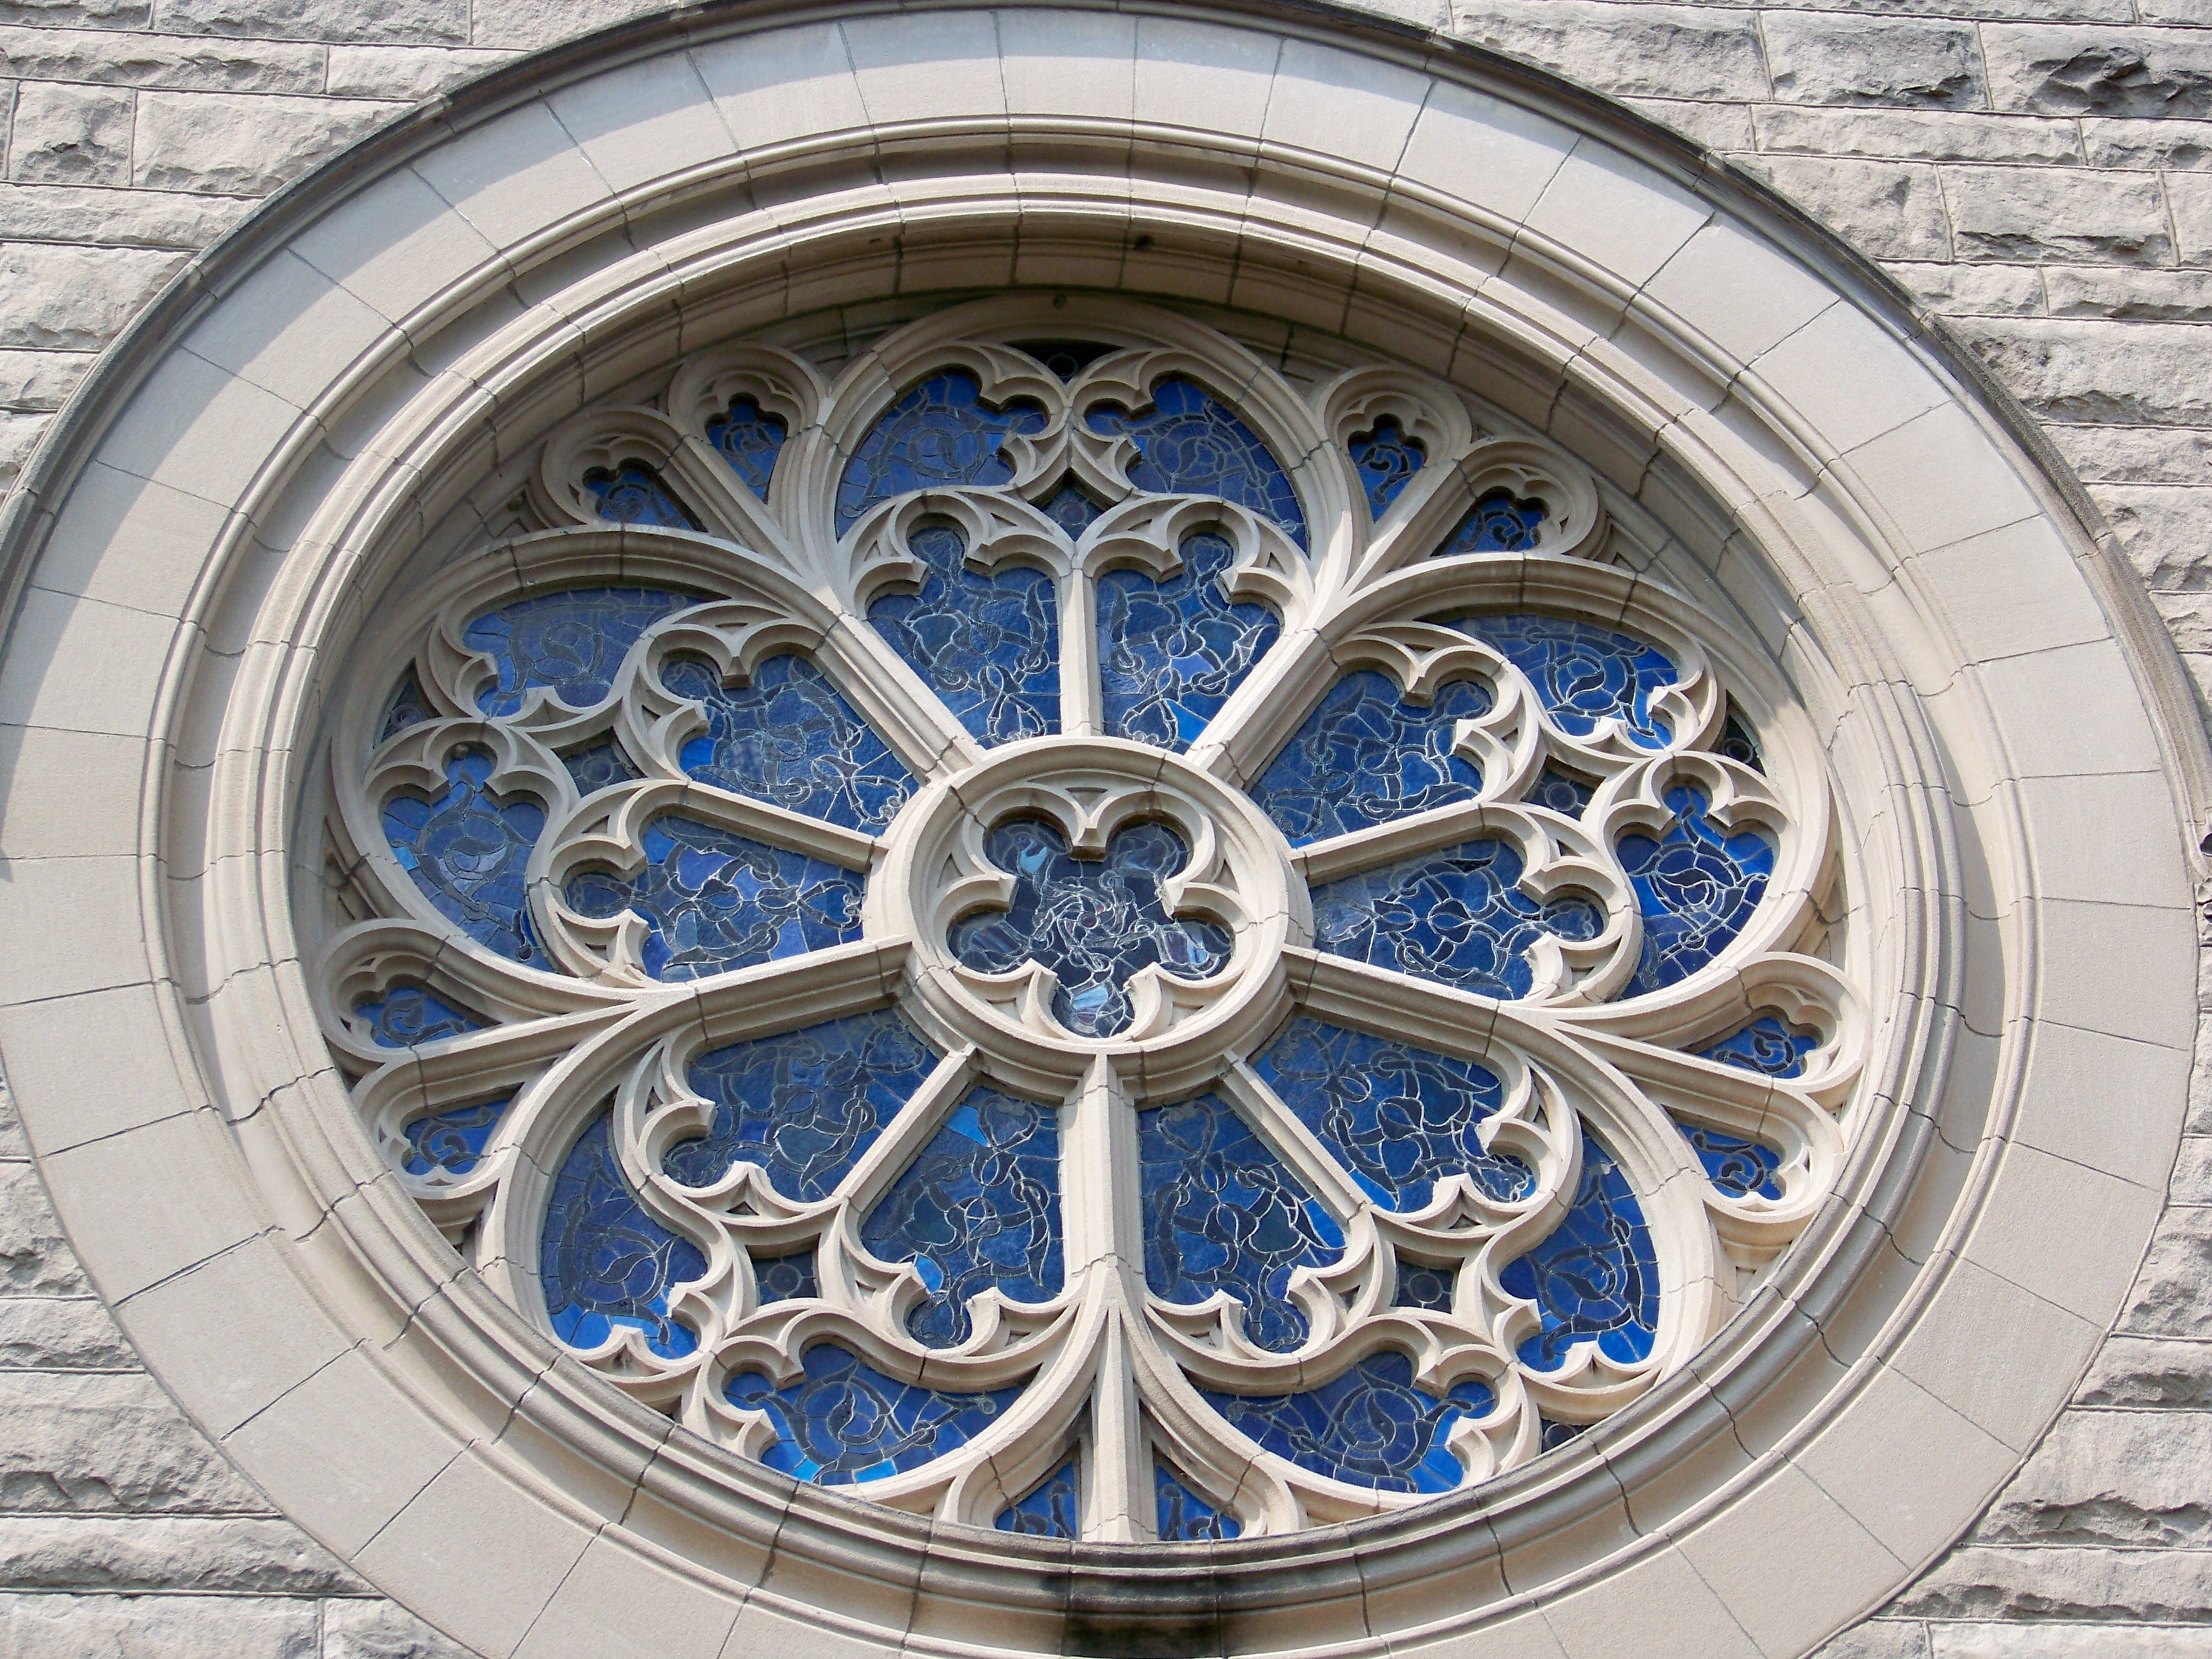 Outside of the north rose window